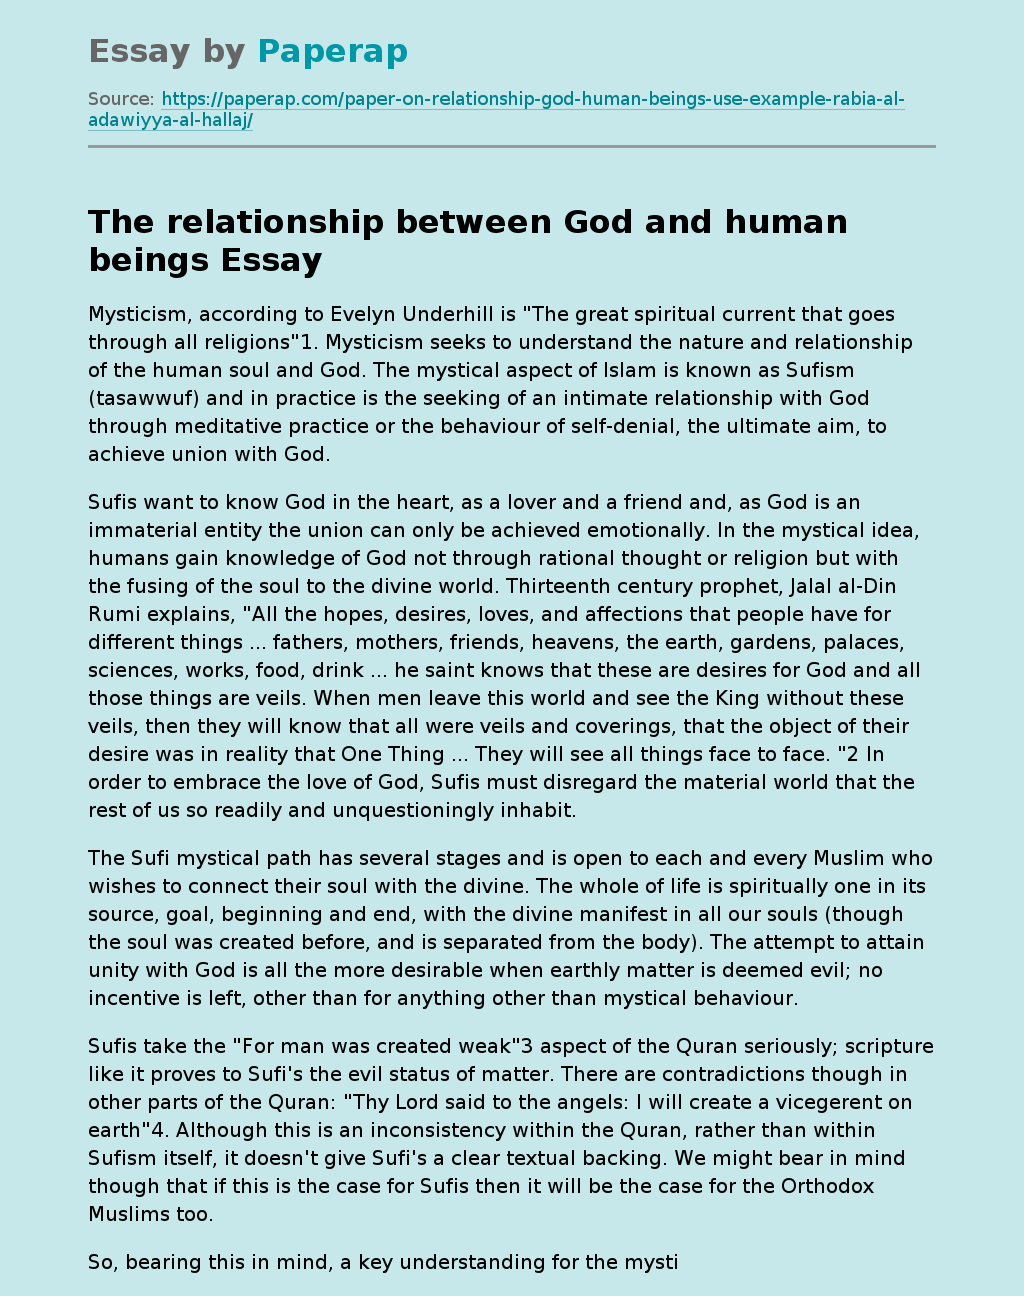 The relationship between God and human beings